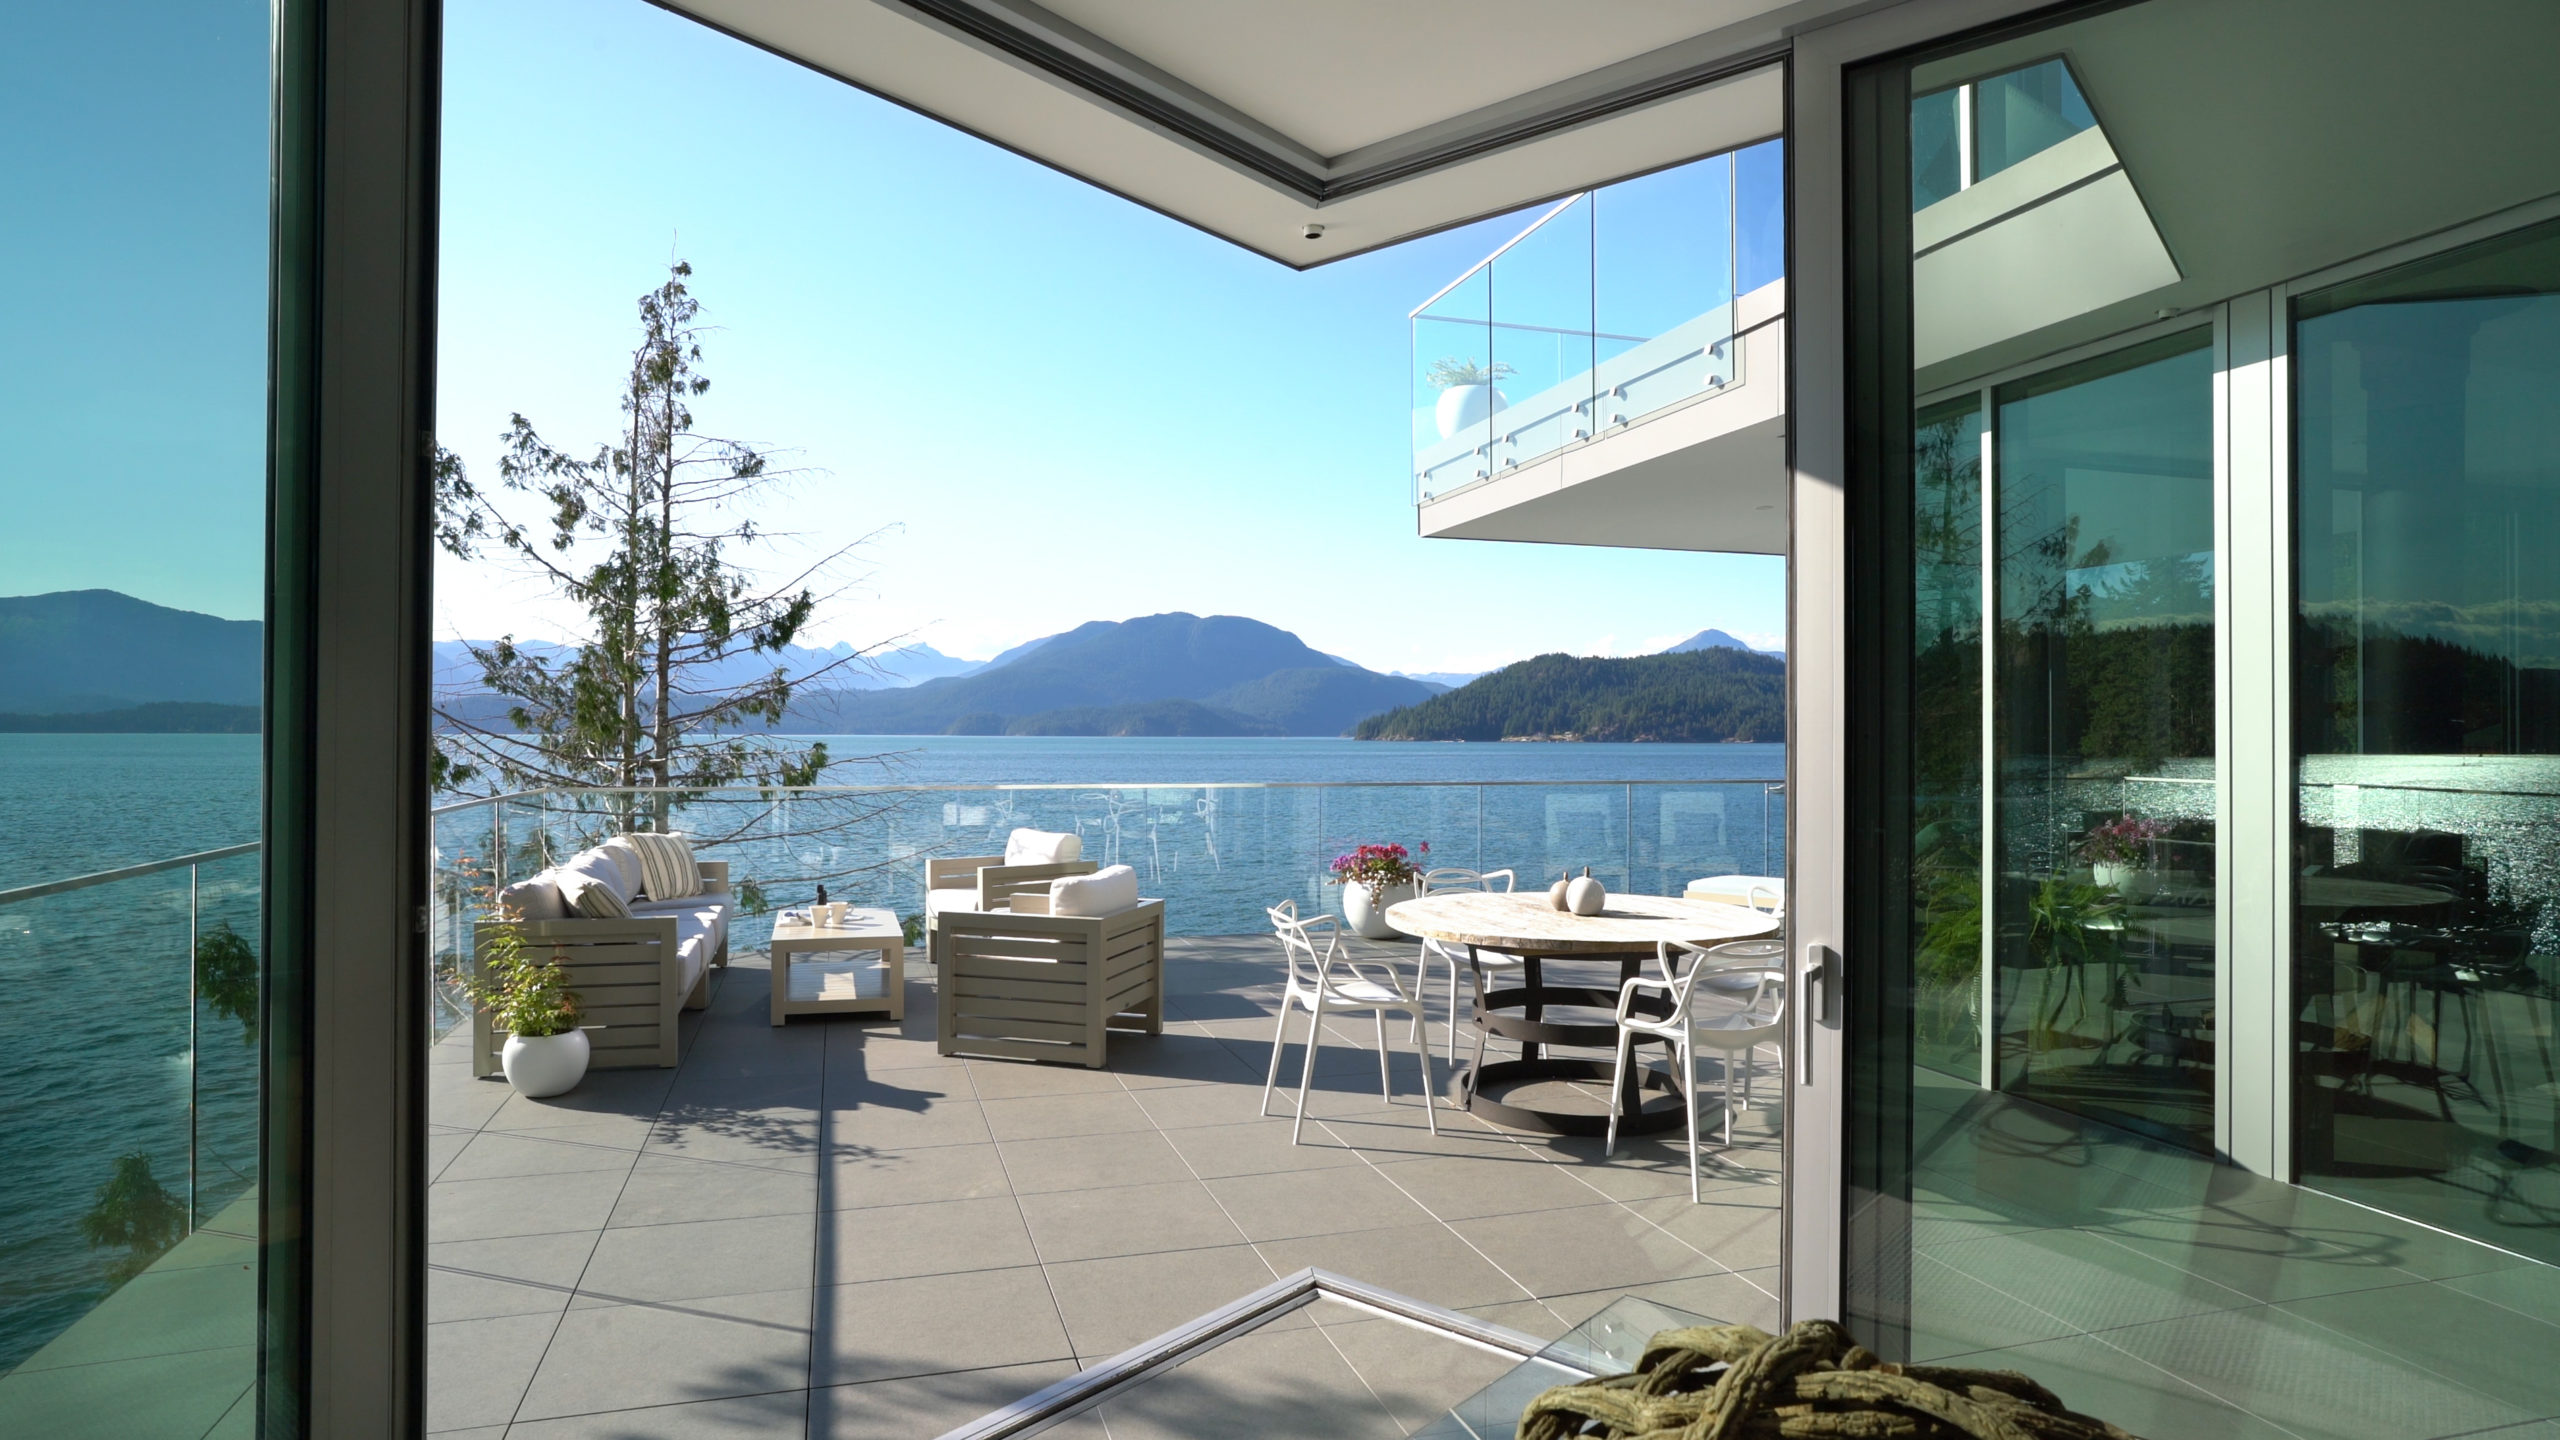 Spacious backyard with ocean view in a luxurious custom residence on Bowen Island.